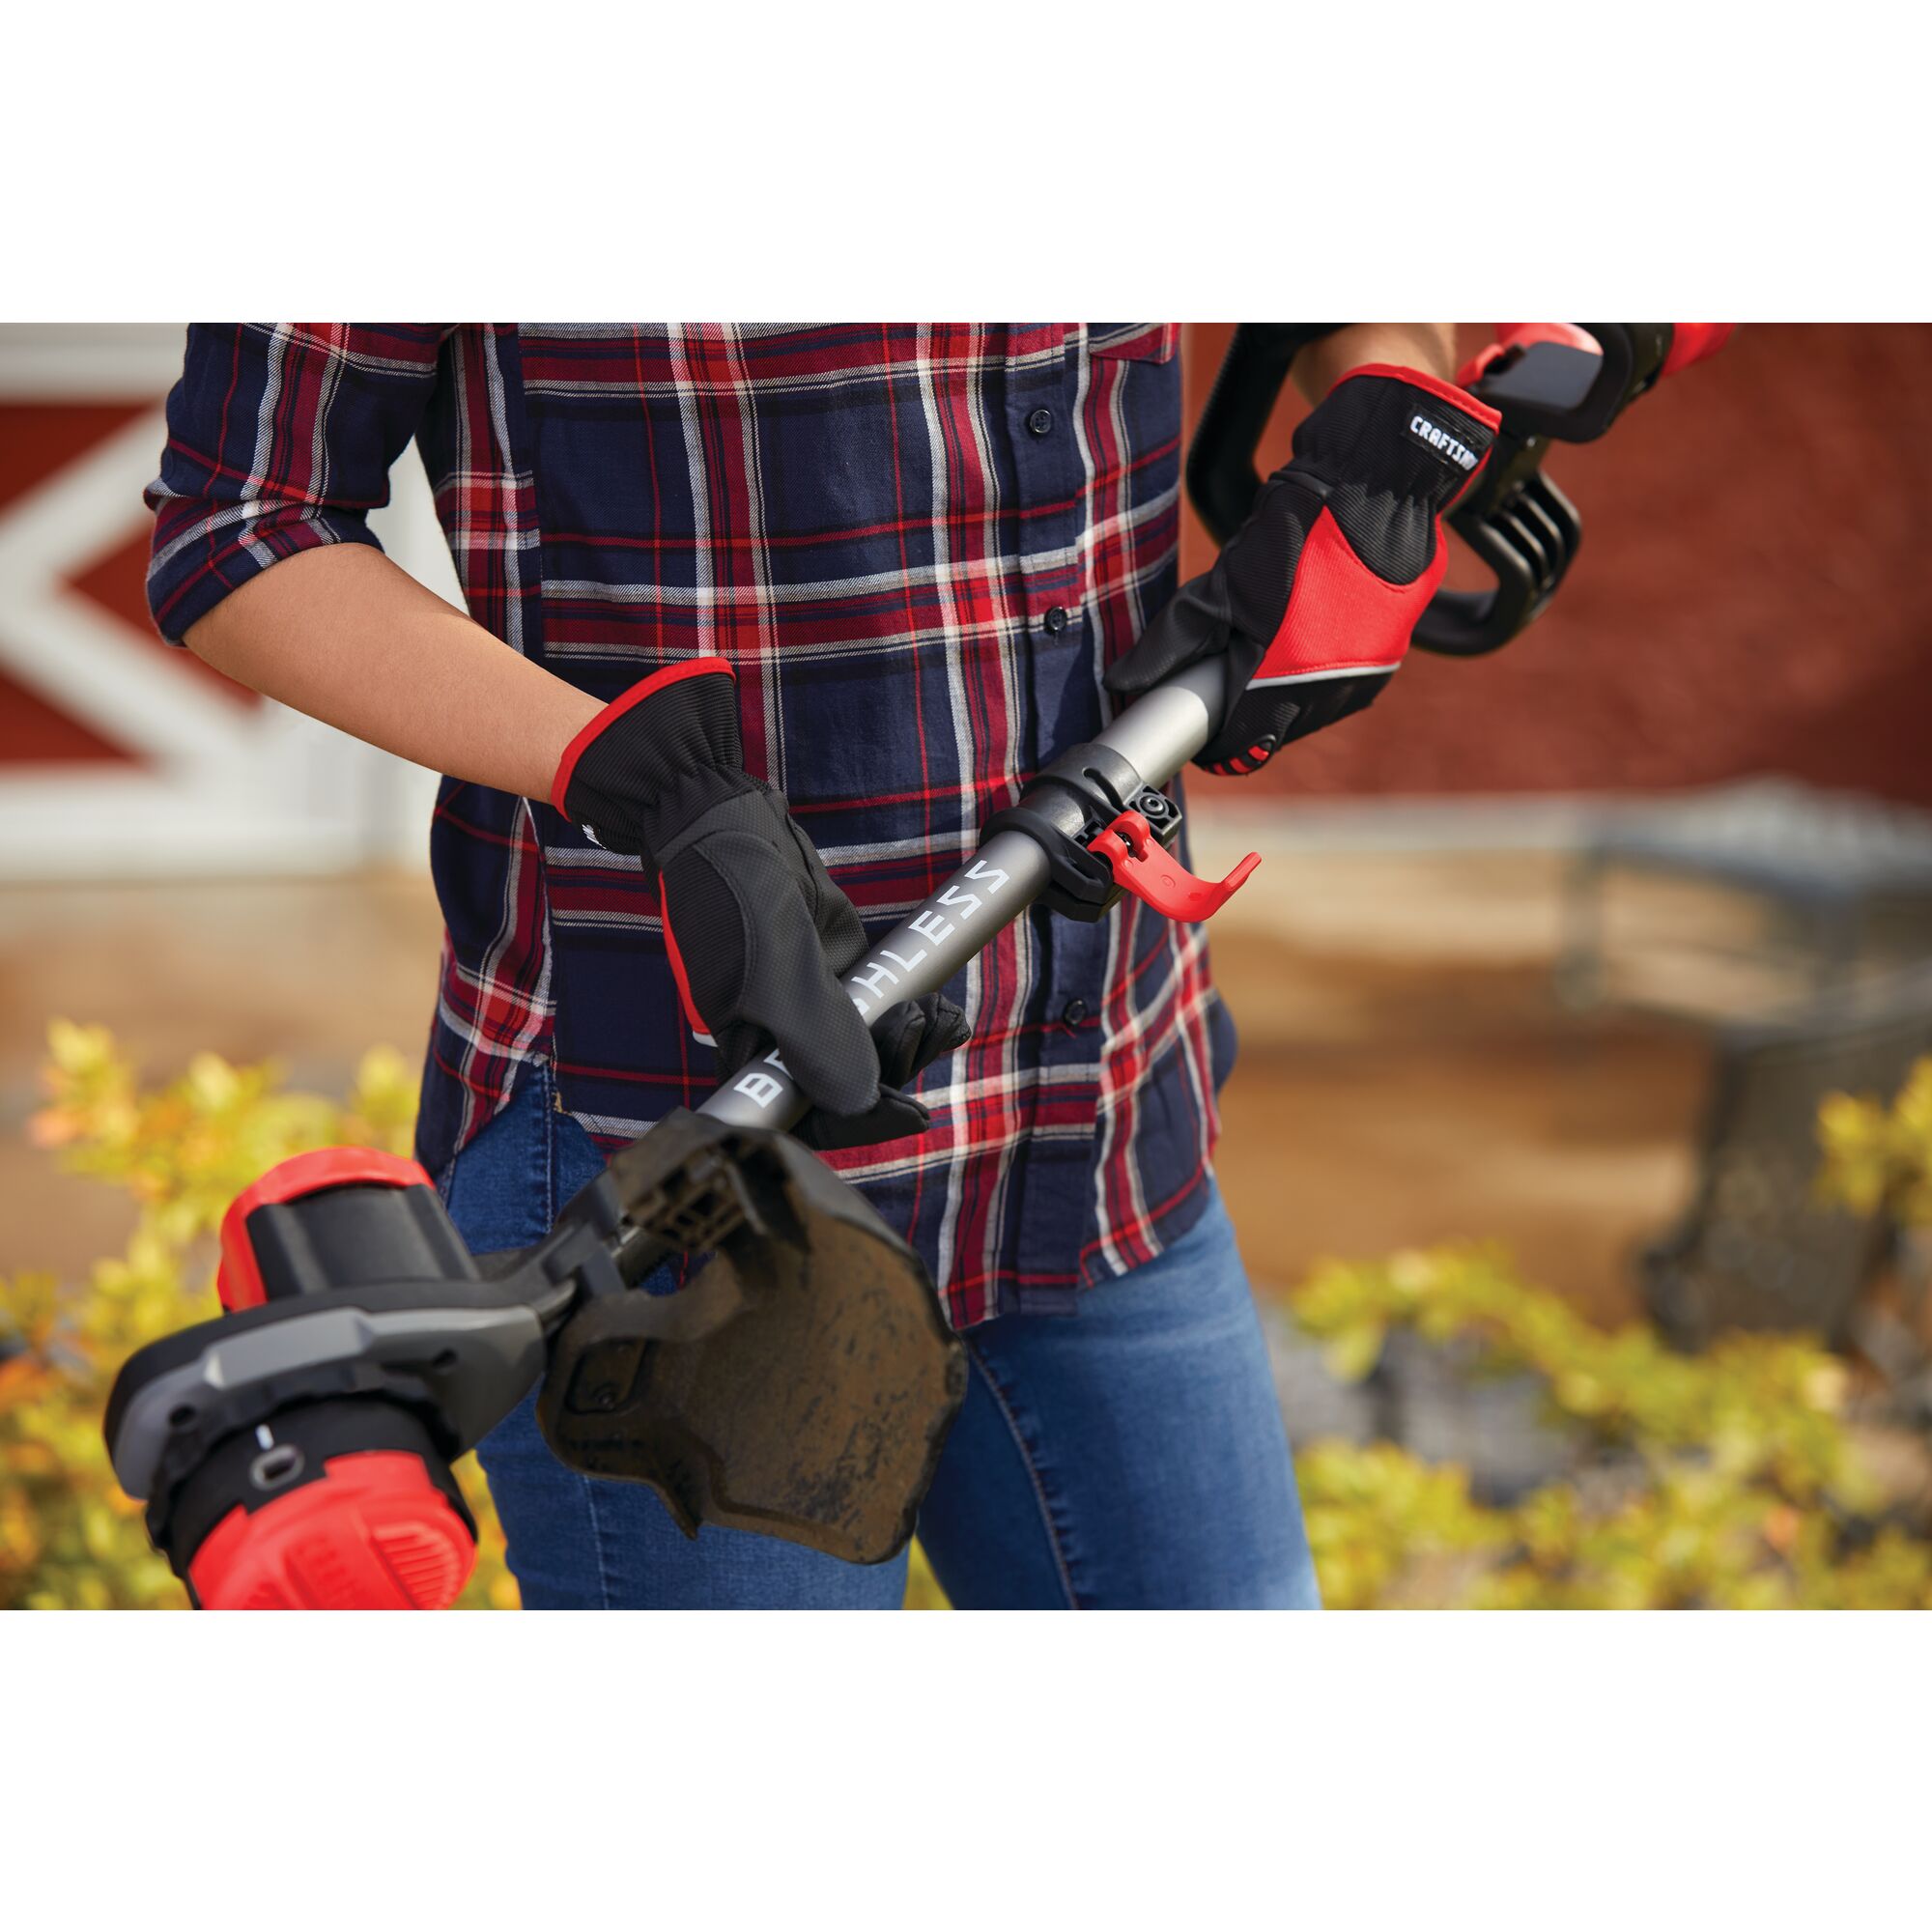 View of CRAFTSMAN String Trimmers highlighting product features